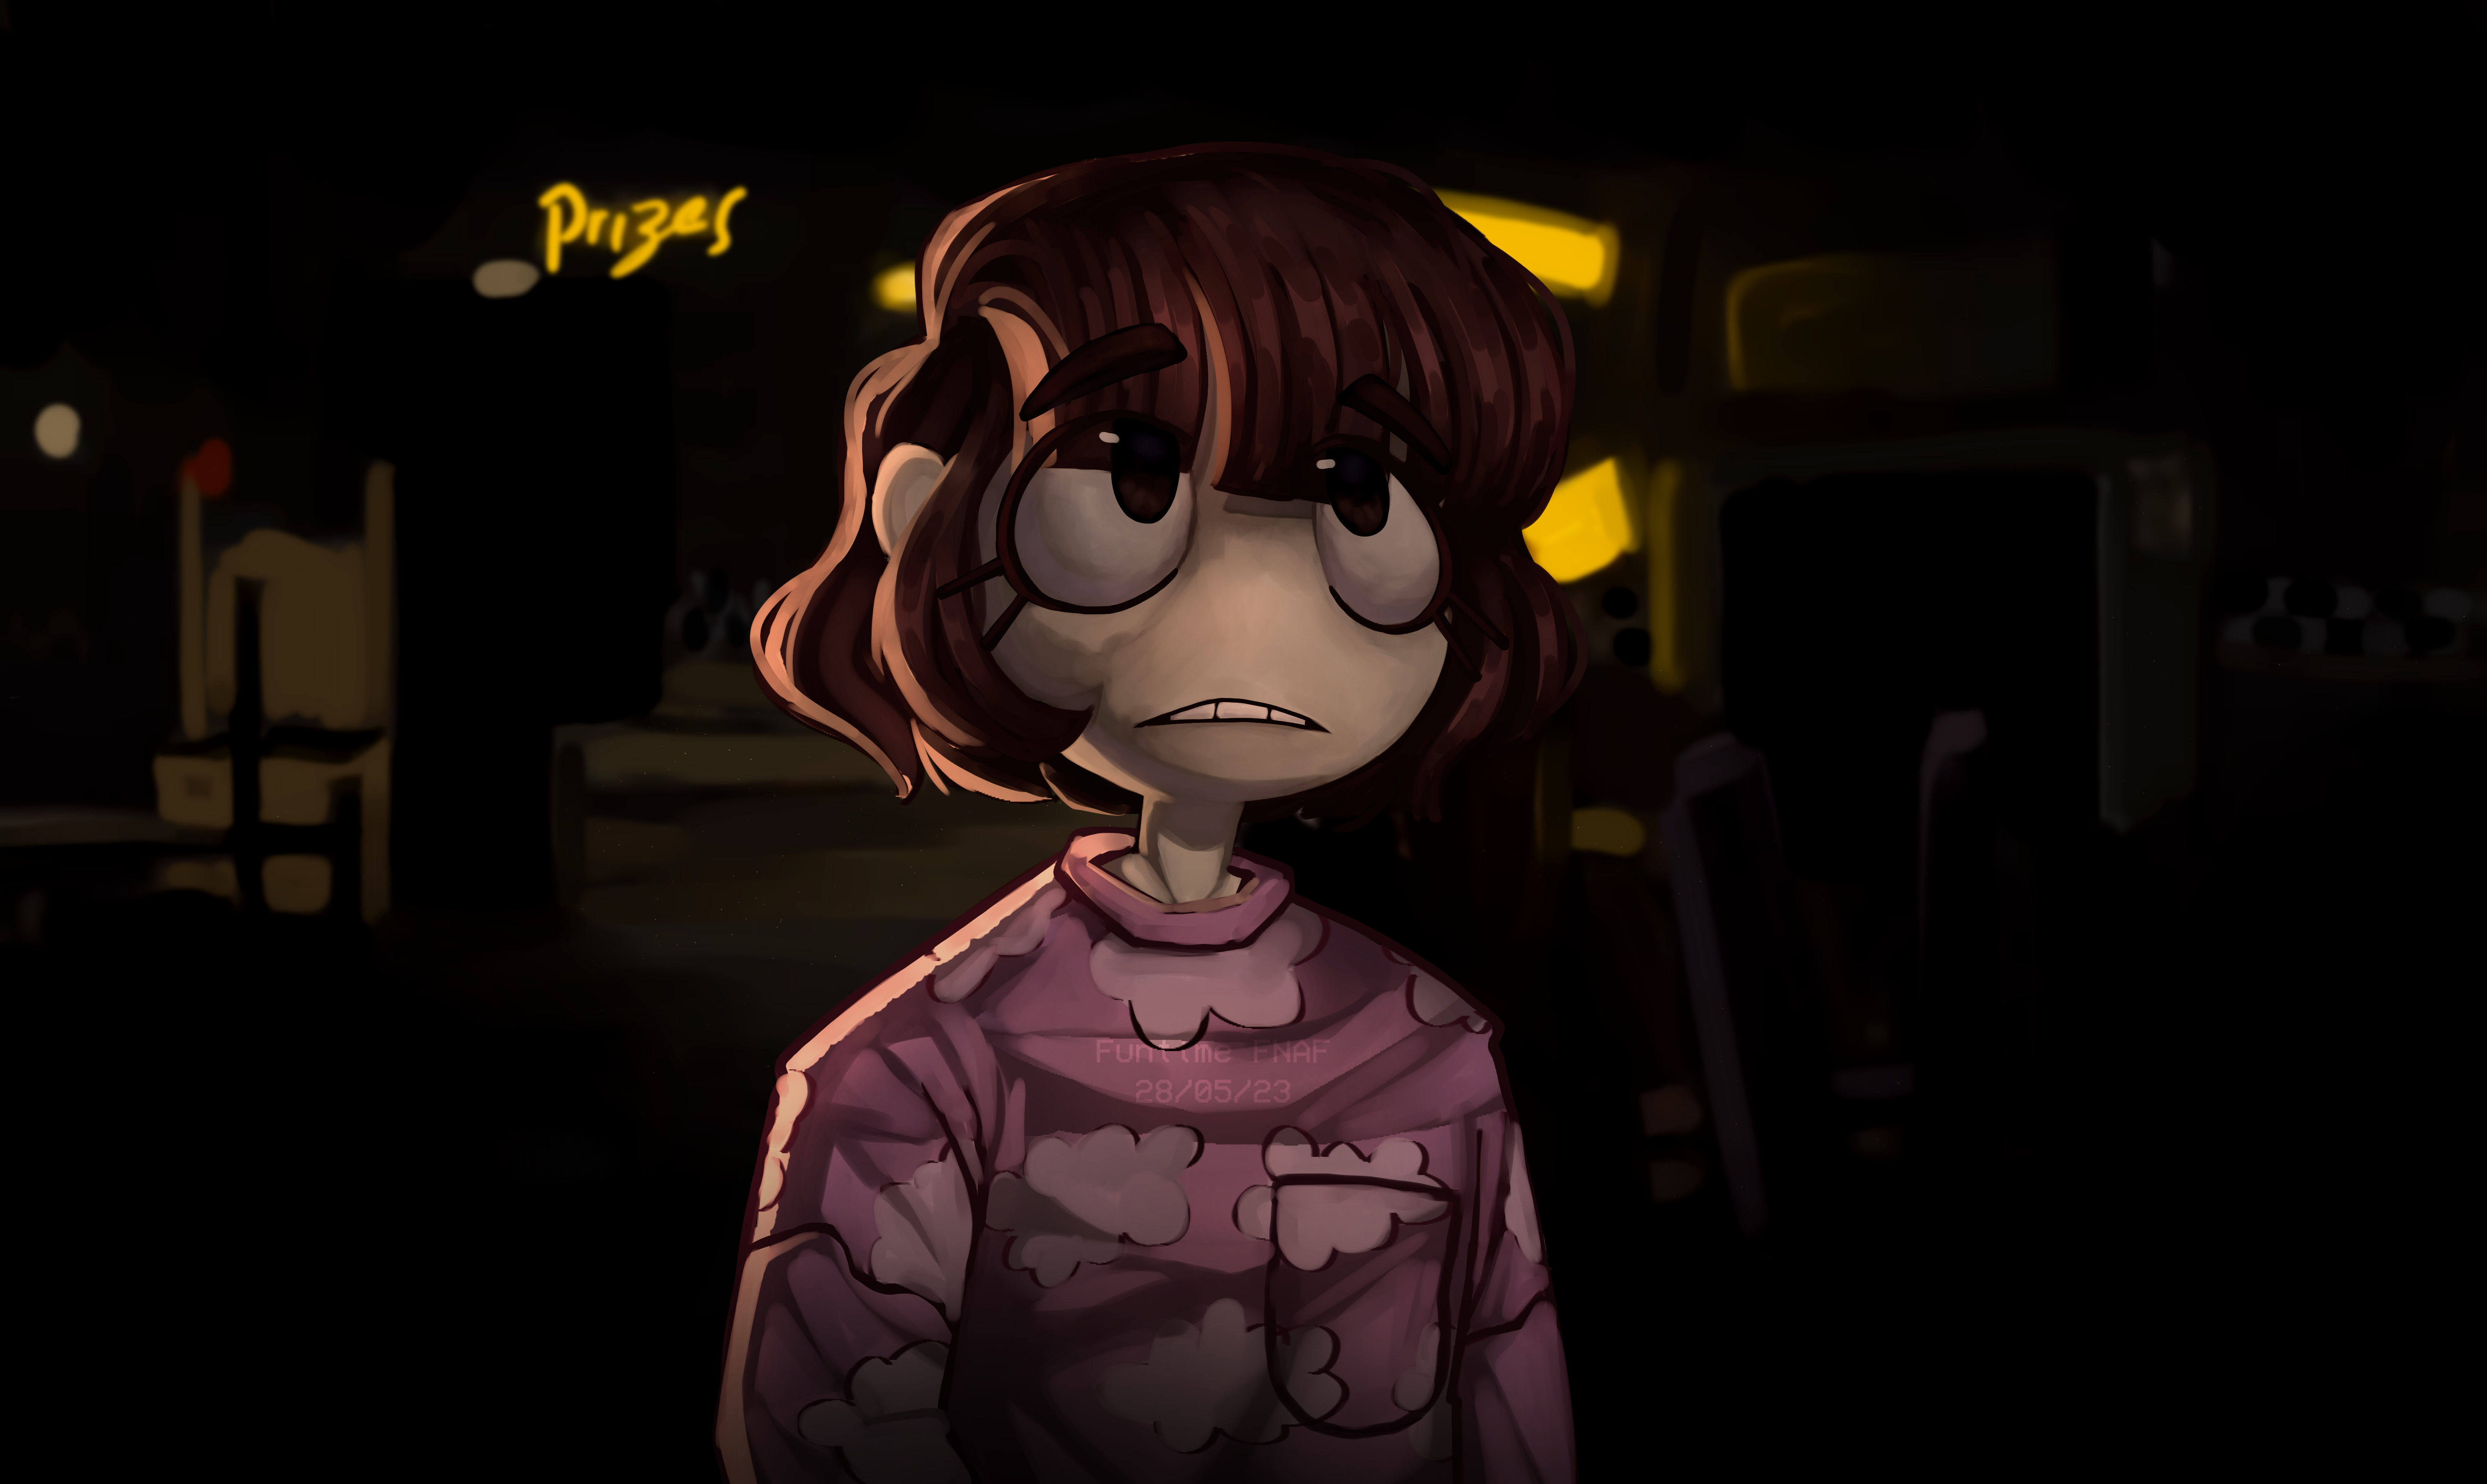 FNAF What If Abby Died in the FNAF Movie? by CinTanGallery on DeviantArt